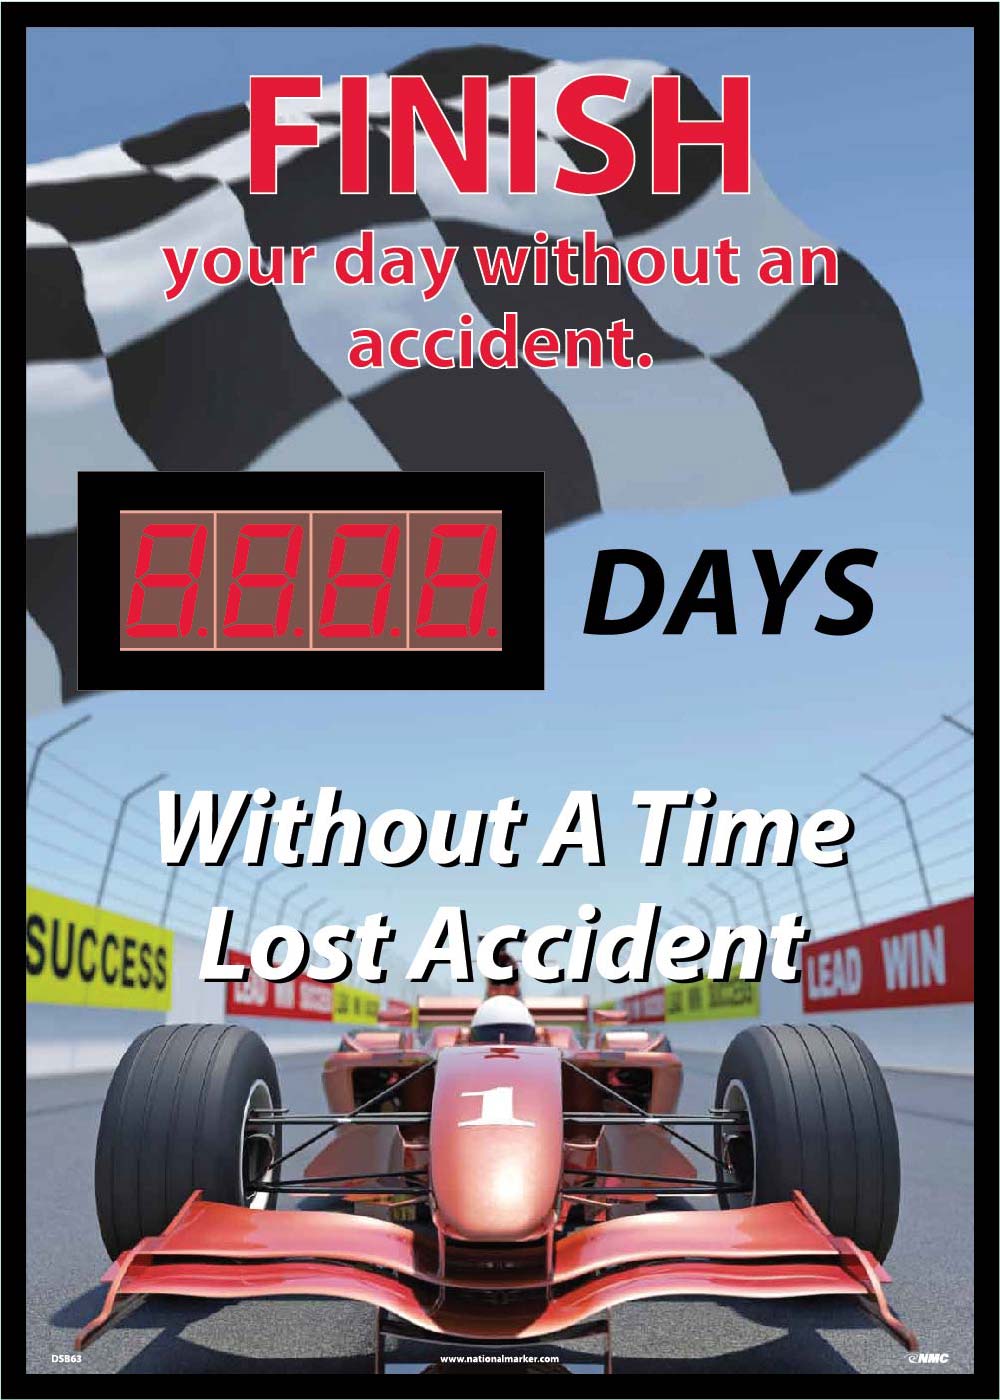 Finish Your Day Without An Accident Scoreboard-eSafety Supplies, Inc